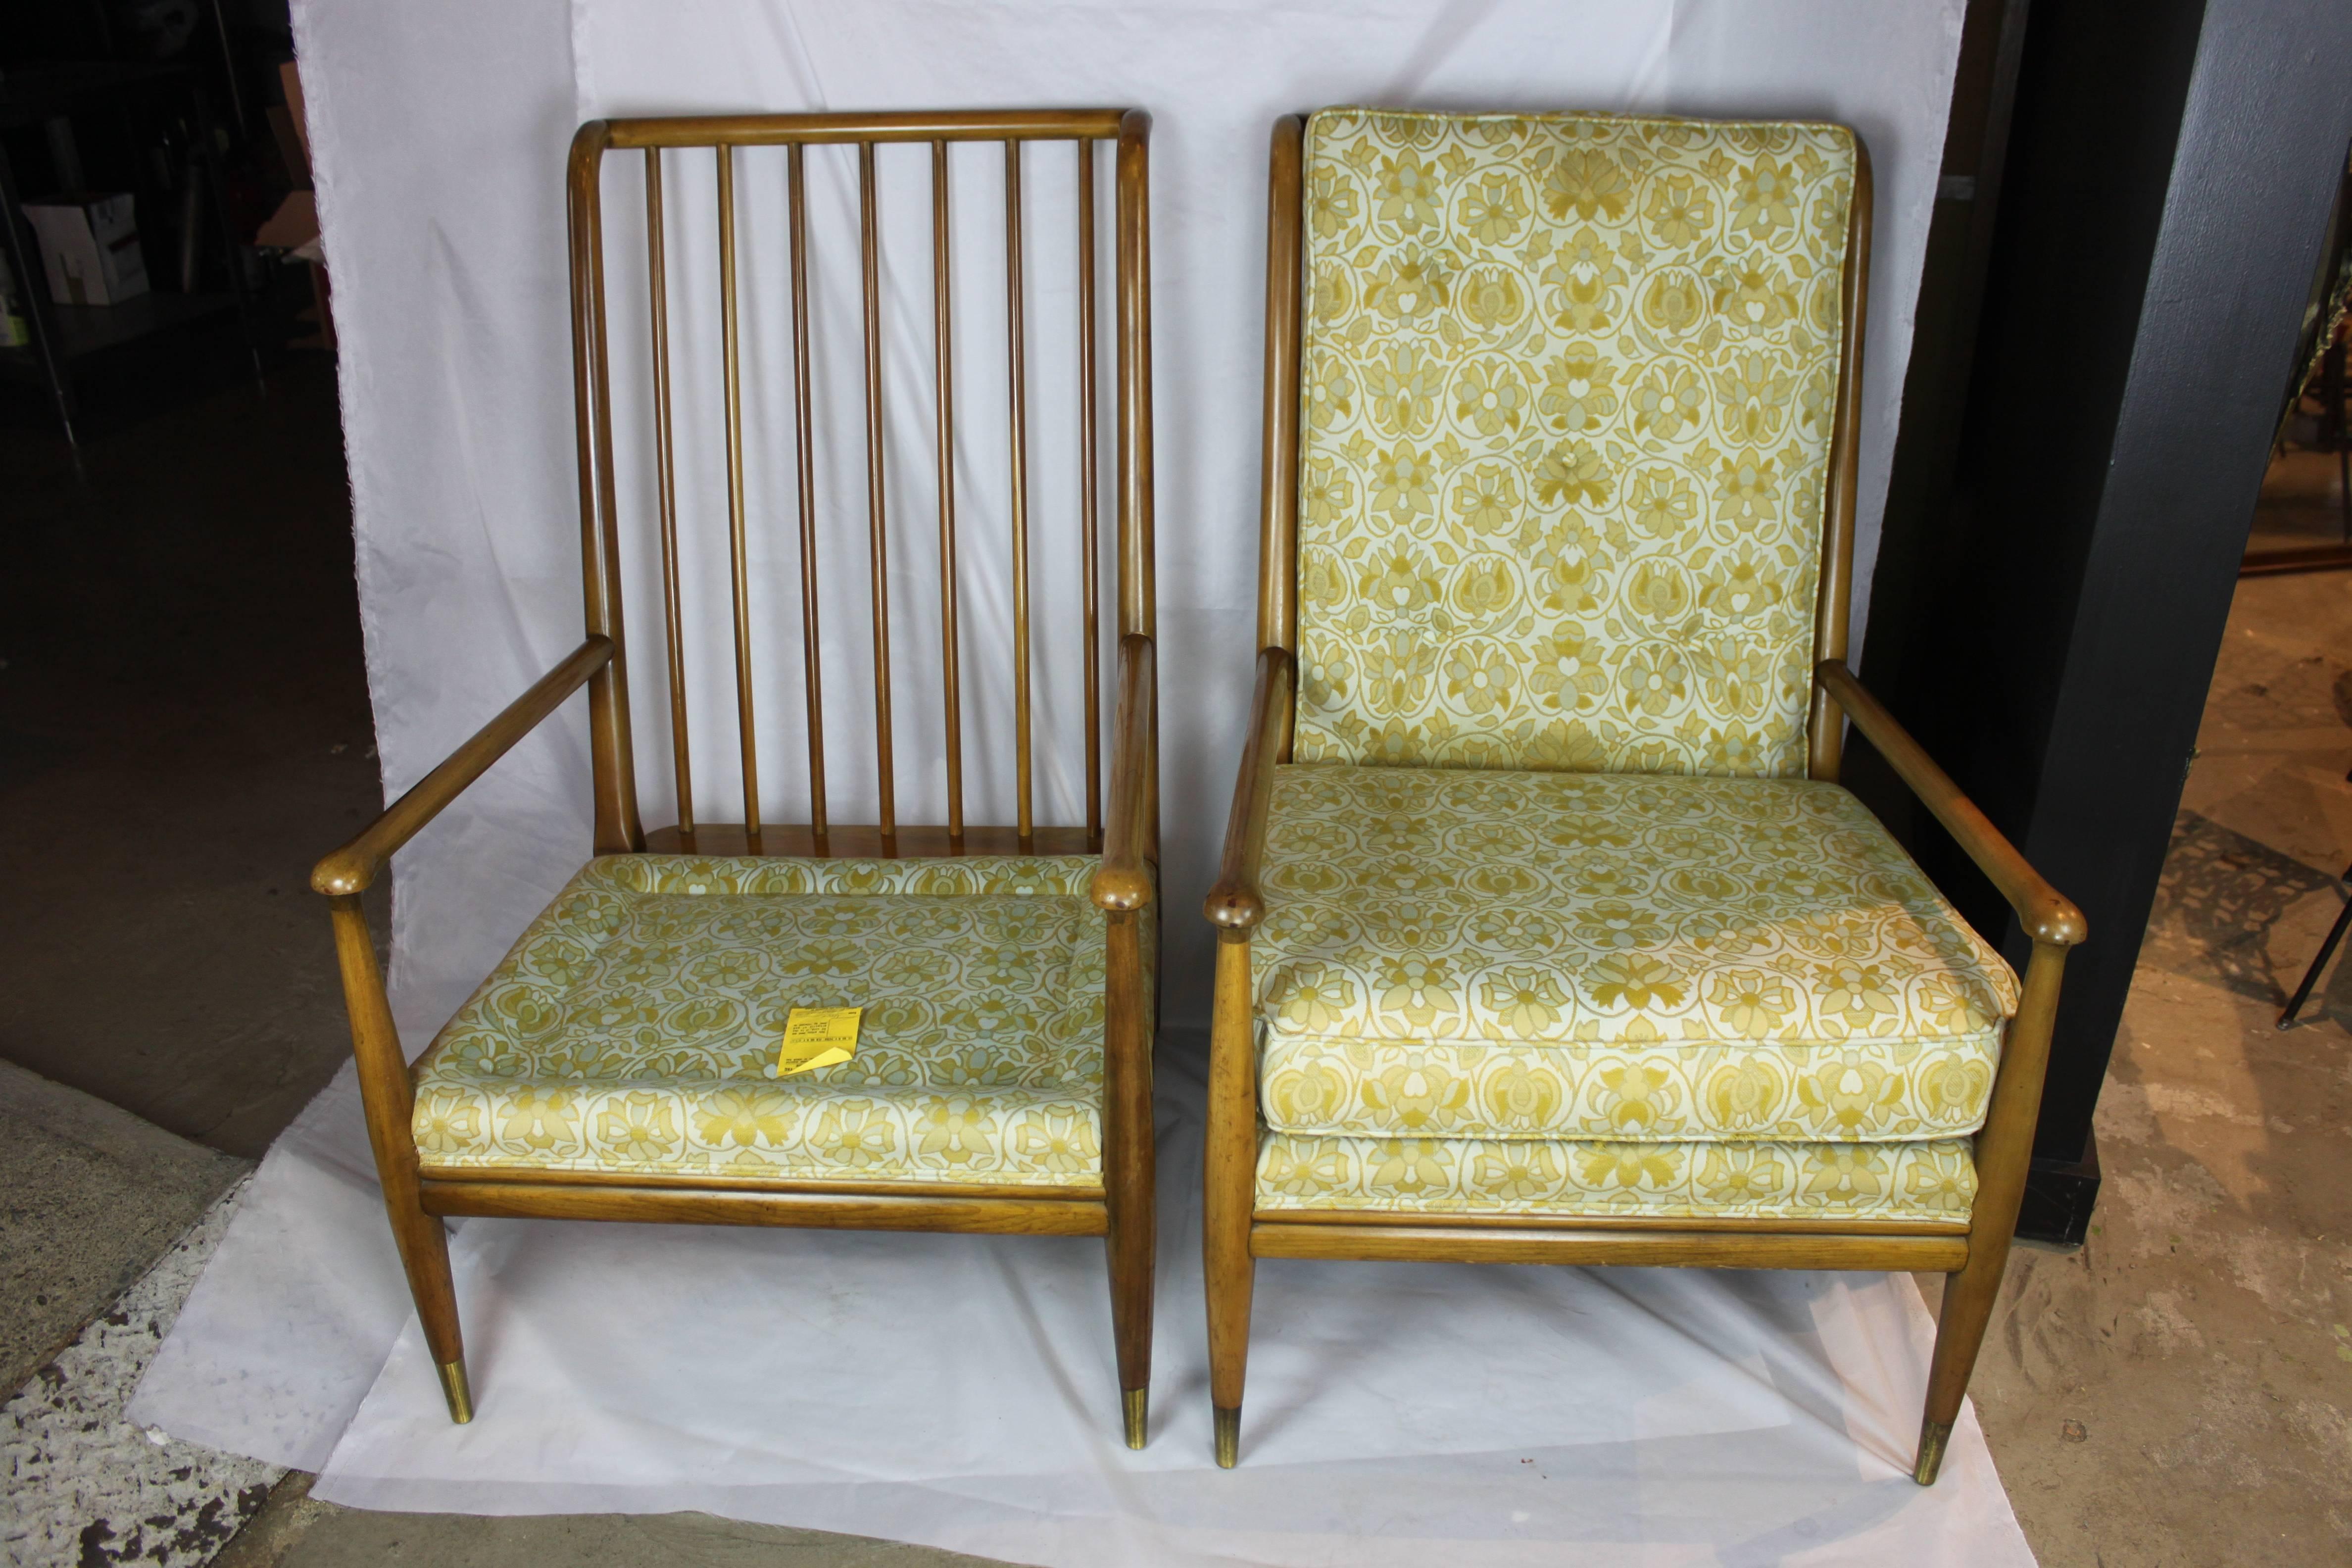 Beautiful high spindle back Widdicomb lounge chairs. Ready for your choice of new upholstery. Frame in very good condition. Minor cuffs and scratches throughout as expected with pieces of this age and use.